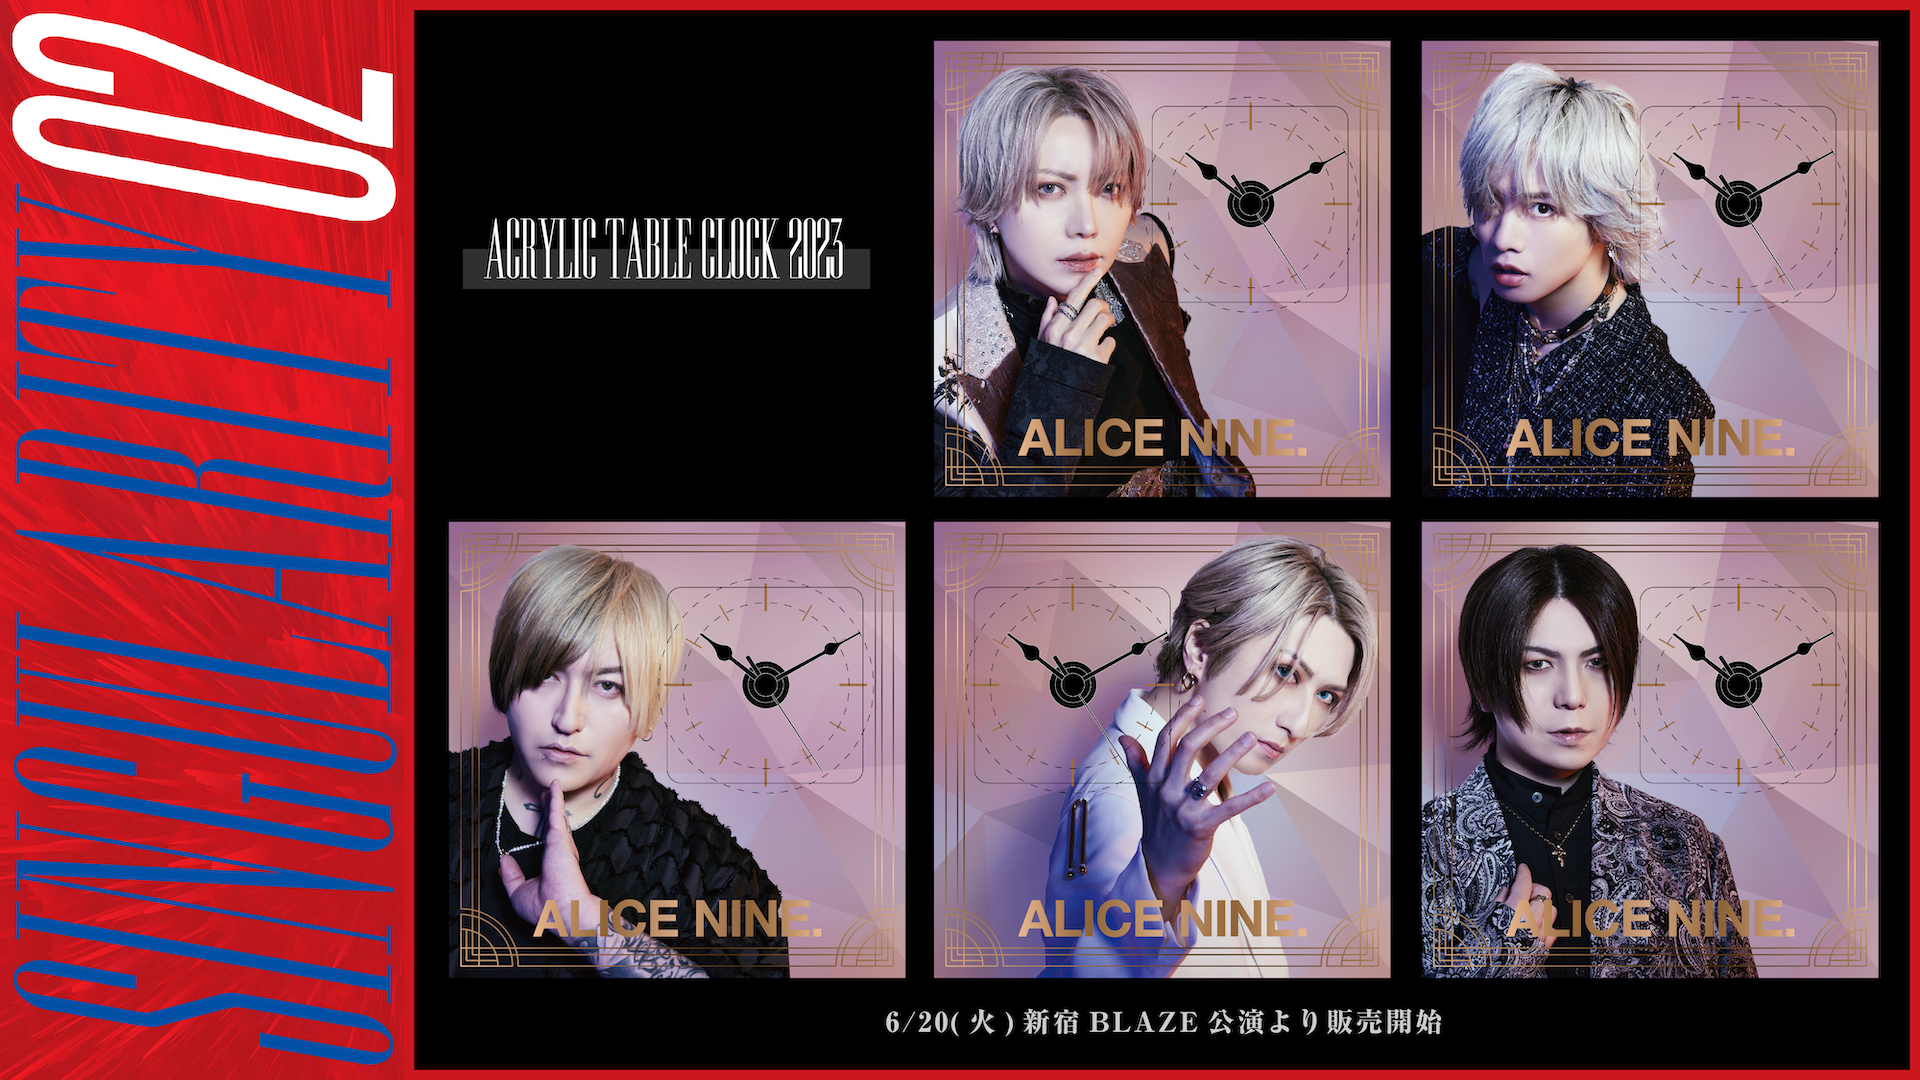 NEWS アリス九號. Official WEB site